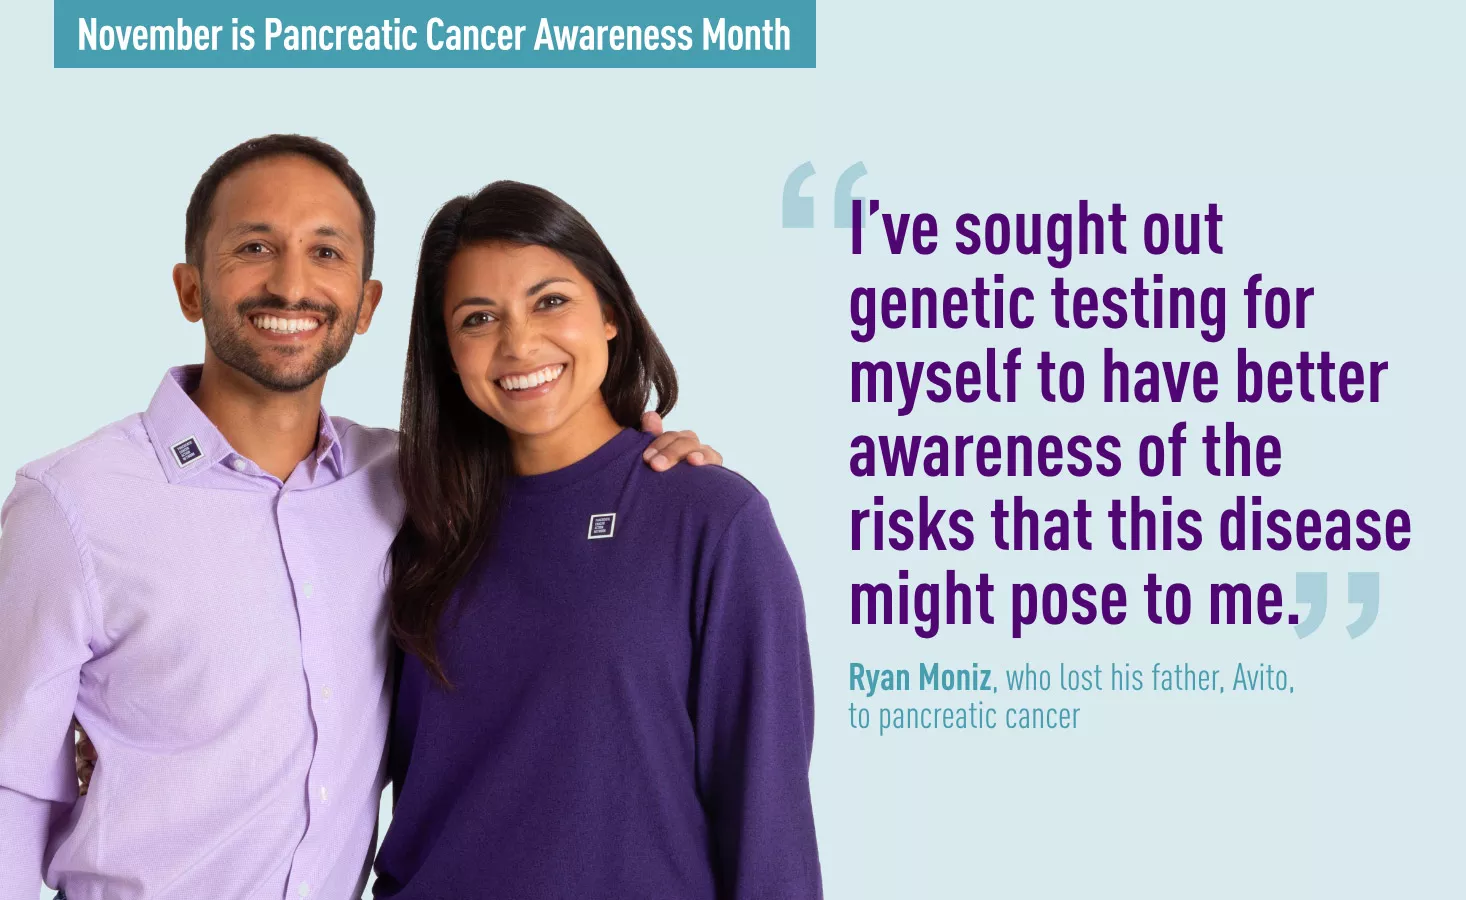 Ryan and Lauren Moniz raise awareness of pancreatic cancer after losing their father to the disease.